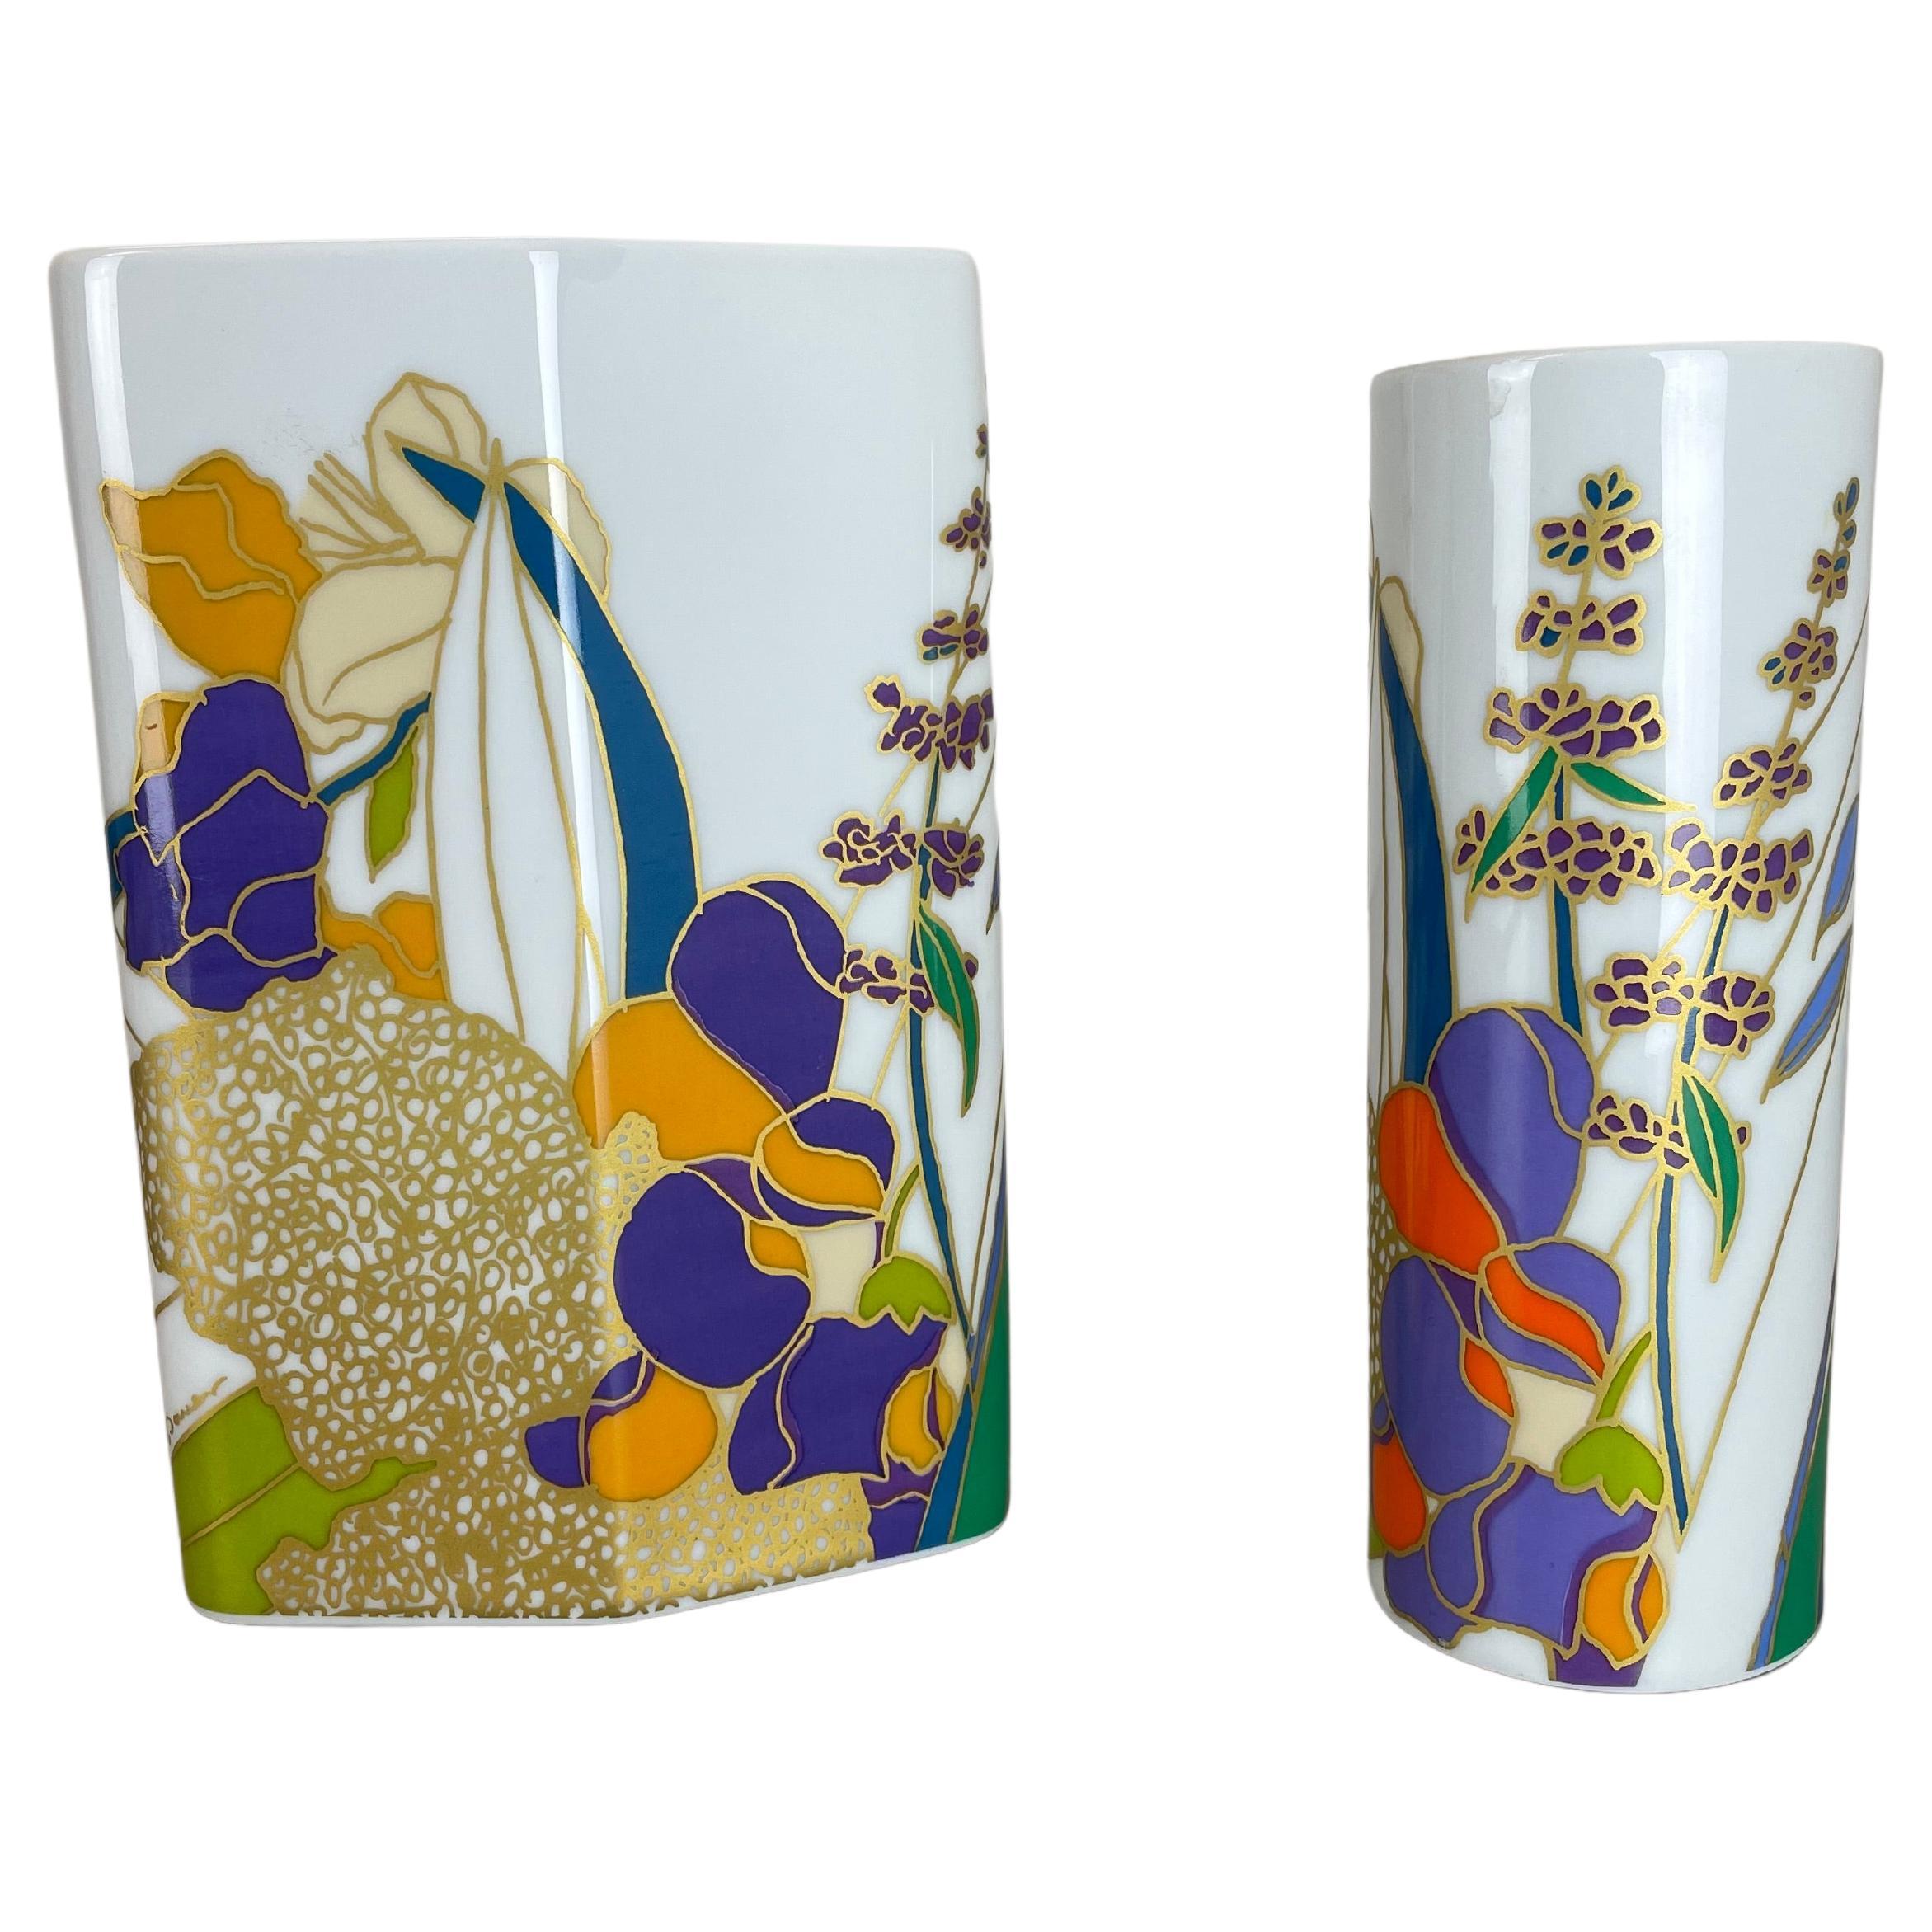 Set of 2 colorful porcelain Vases by Wolf Bauer for Rosenthal, Germany, 1980s